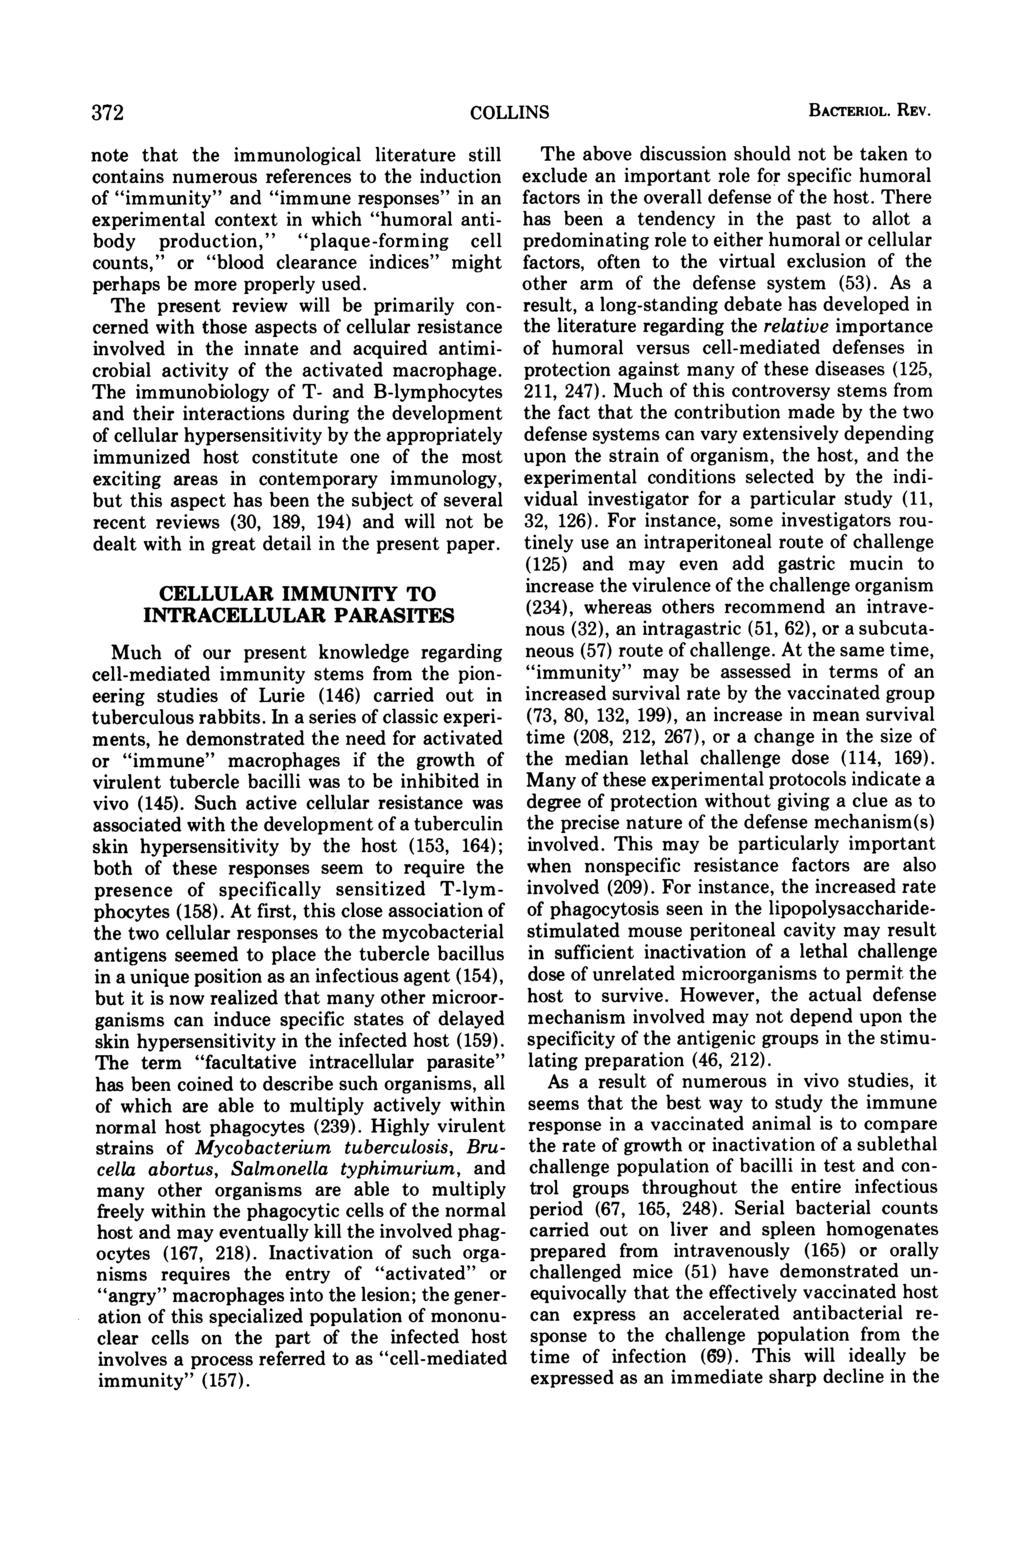 372 COLLINS note that the immunological literature still contains numerous references to the induction of "immunity" and "immune responses" in an experimental context in which "humoral antibody